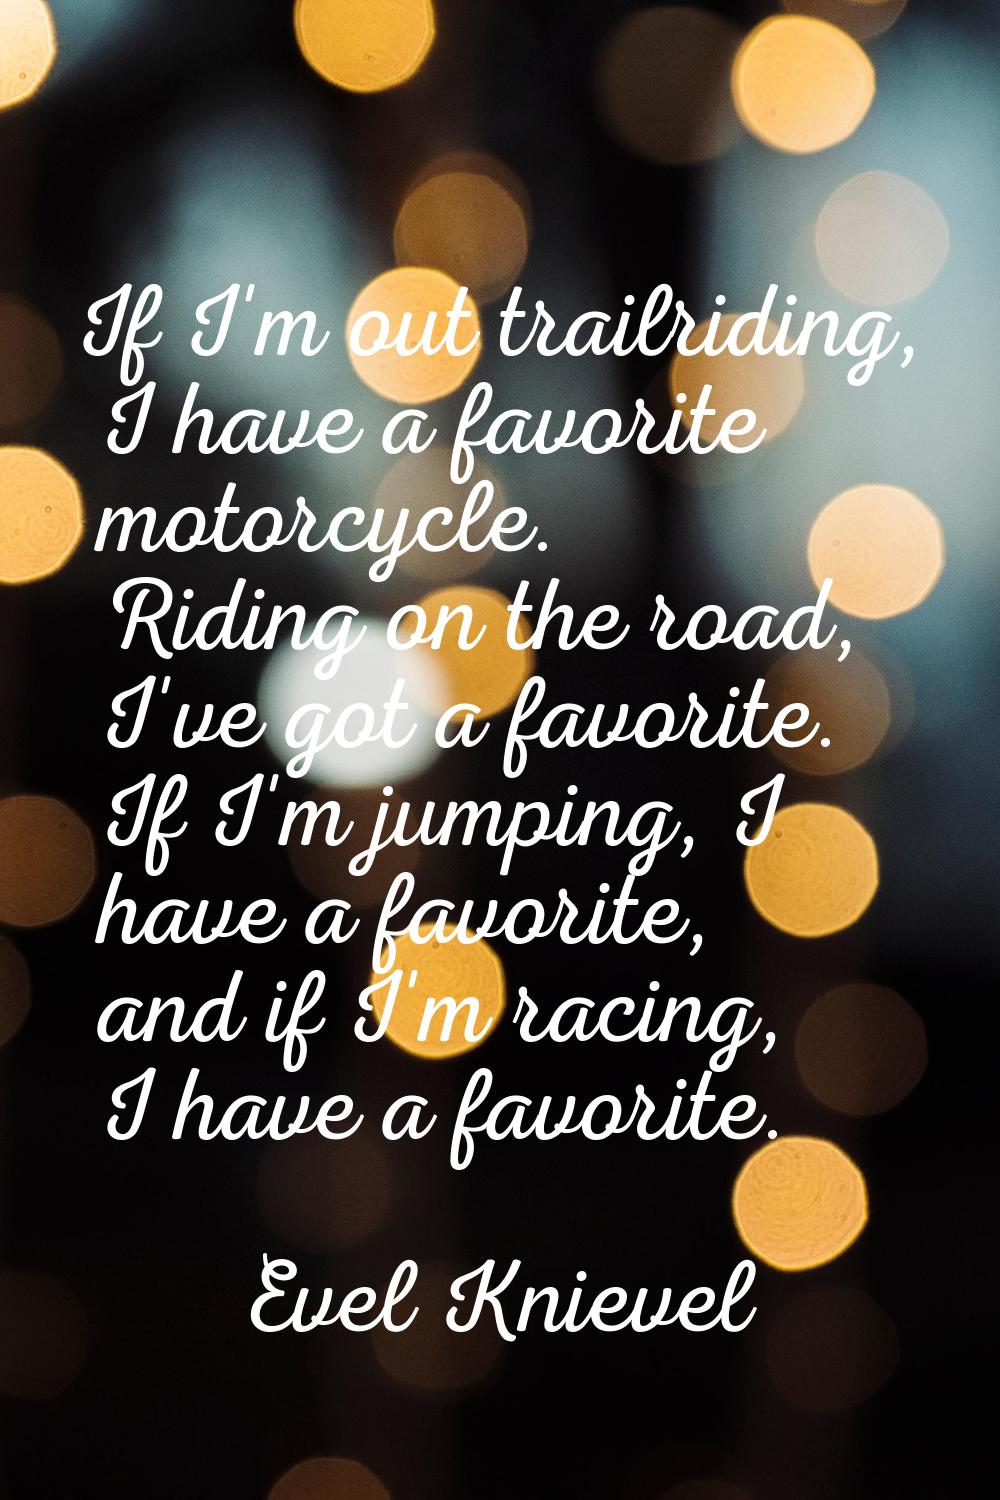 If I'm out trailriding, I have a favorite motorcycle. Riding on the road, I've got a favorite. If I